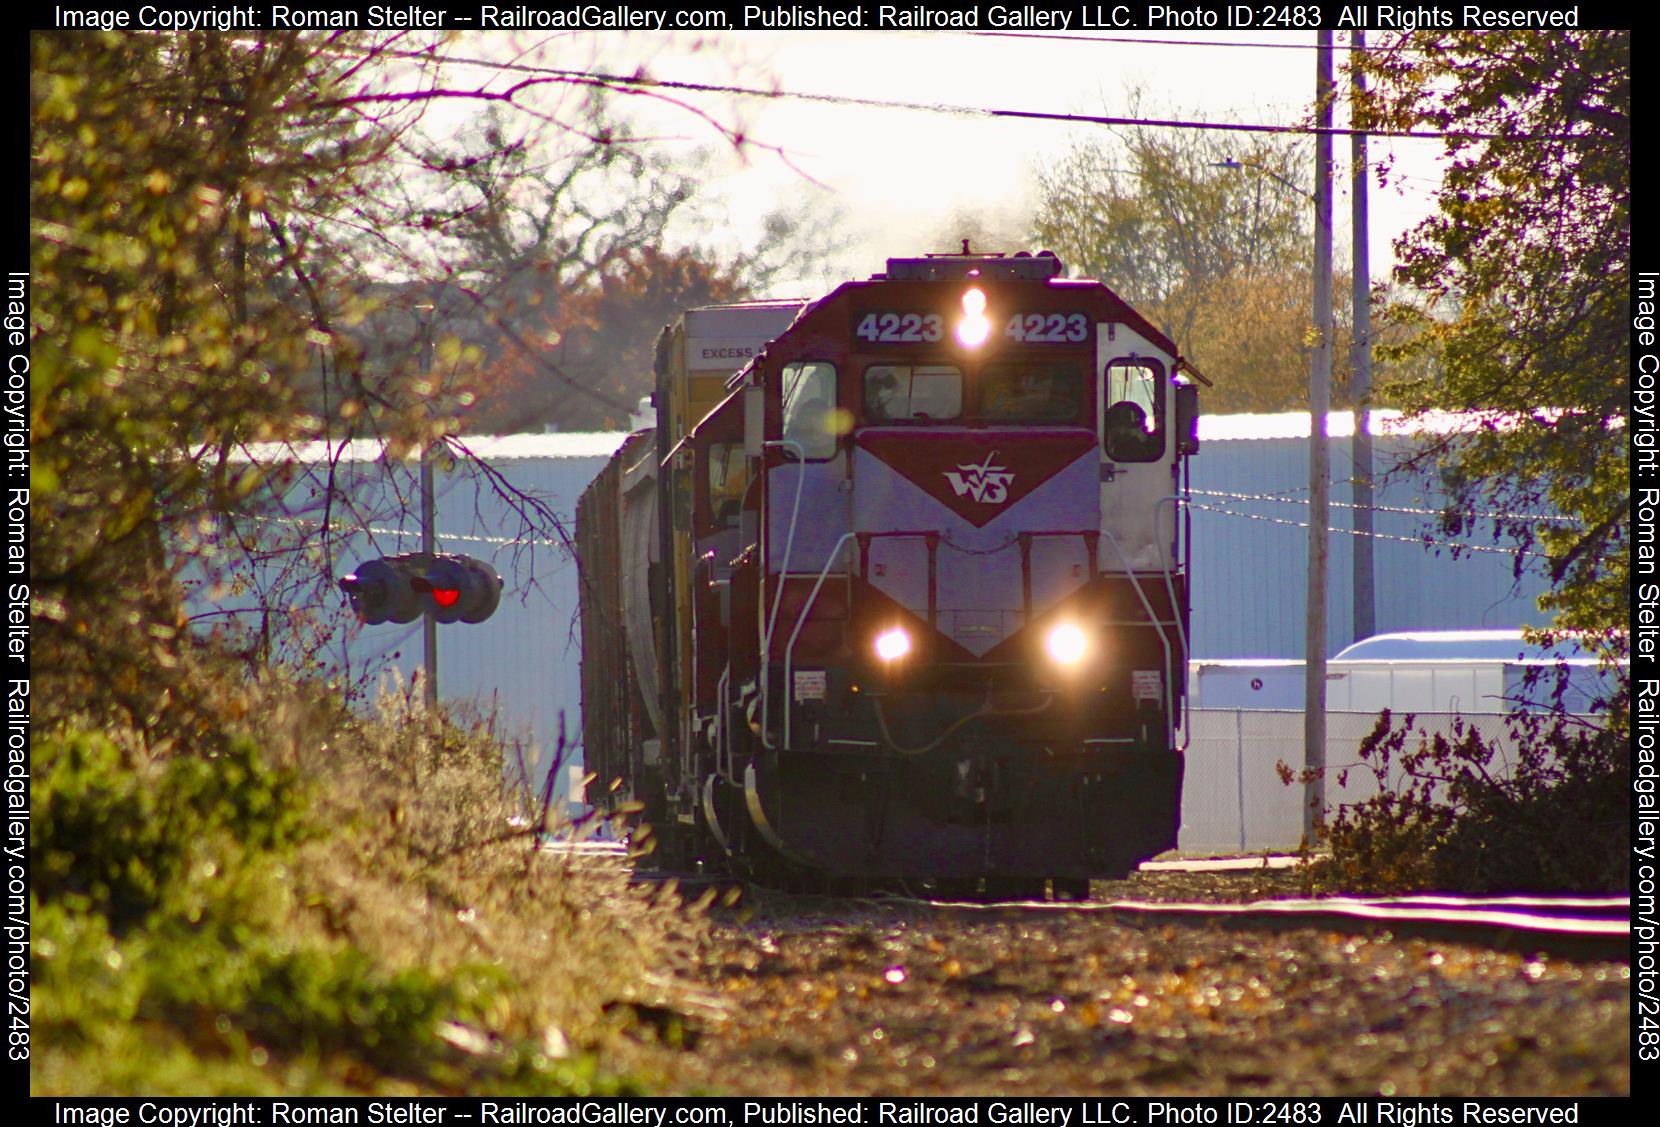 WAMX 4223 is a class SD40-2 and  is pictured in Ripon, Wisconsin, United States.  This was taken along the Oshkosh Subdivision on the Wisconsin and Southern Railroad. Photo Copyright: Roman Stelter uploaded to Railroad Gallery on 11/21/2023. This photograph of WAMX 4223 was taken on Saturday, September 30, 2023. All Rights Reserved. 